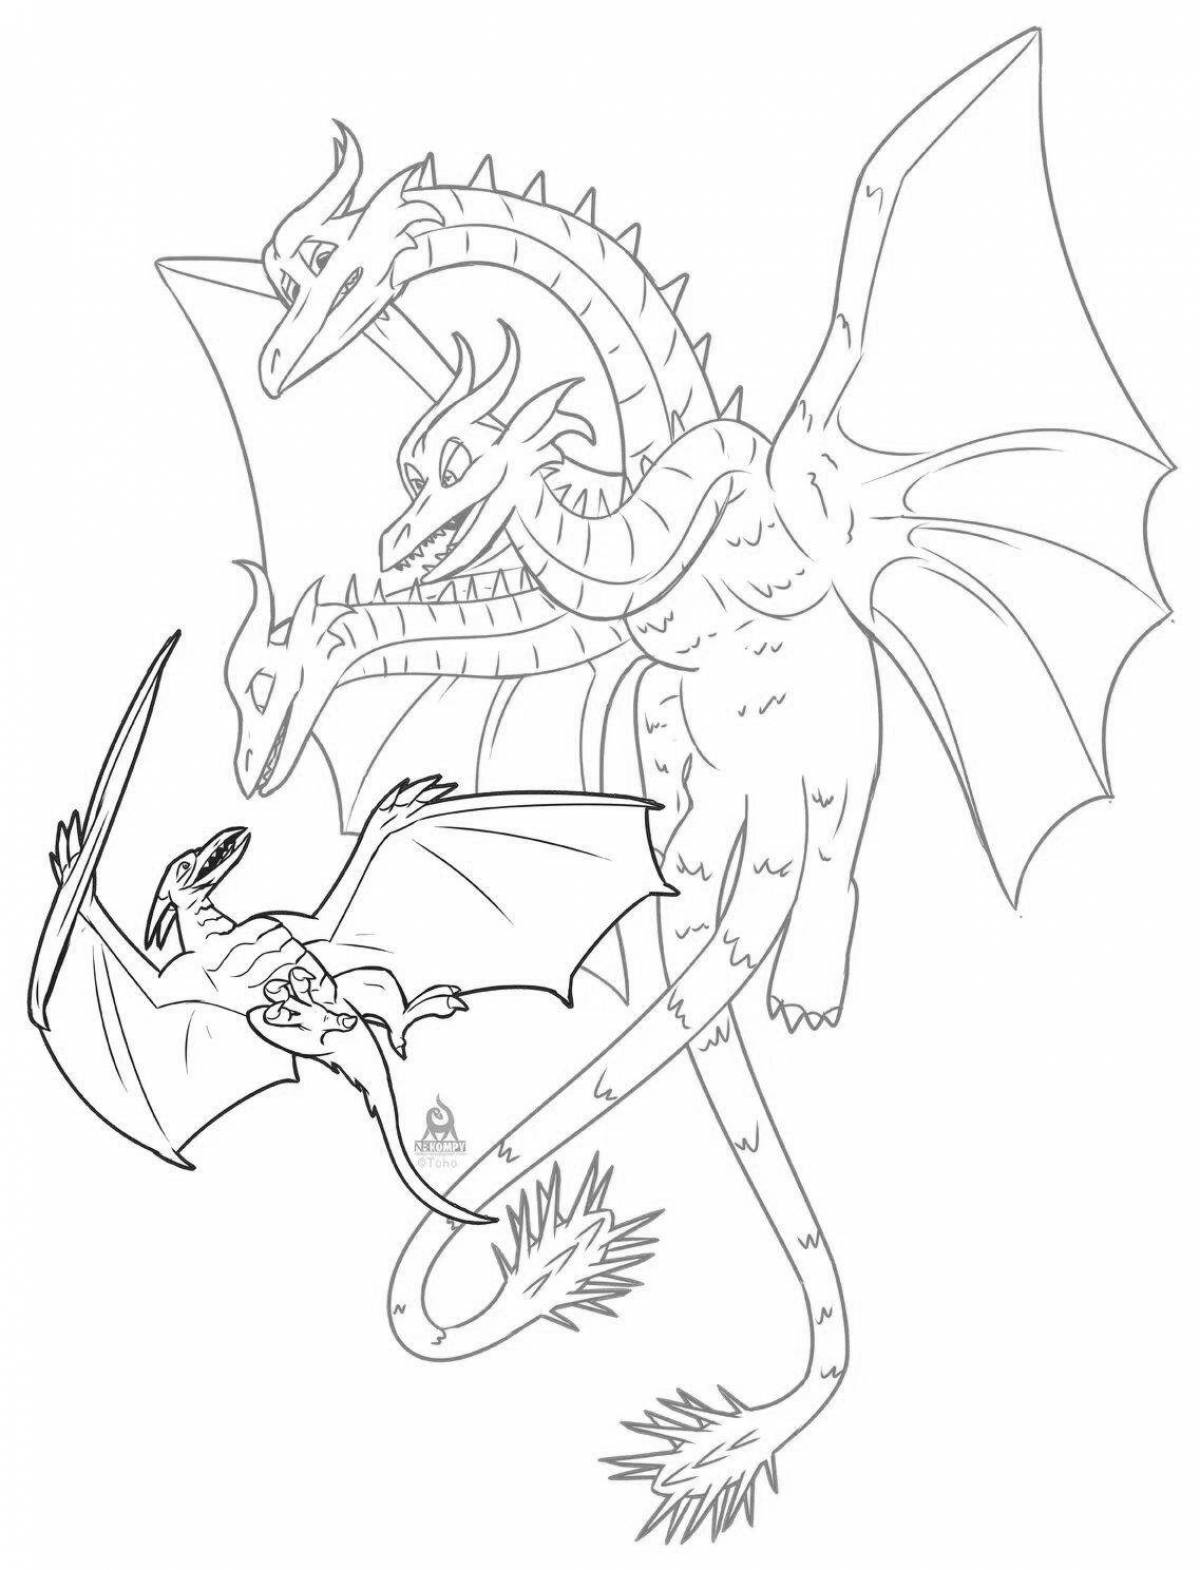 King ghidora epic coloring book